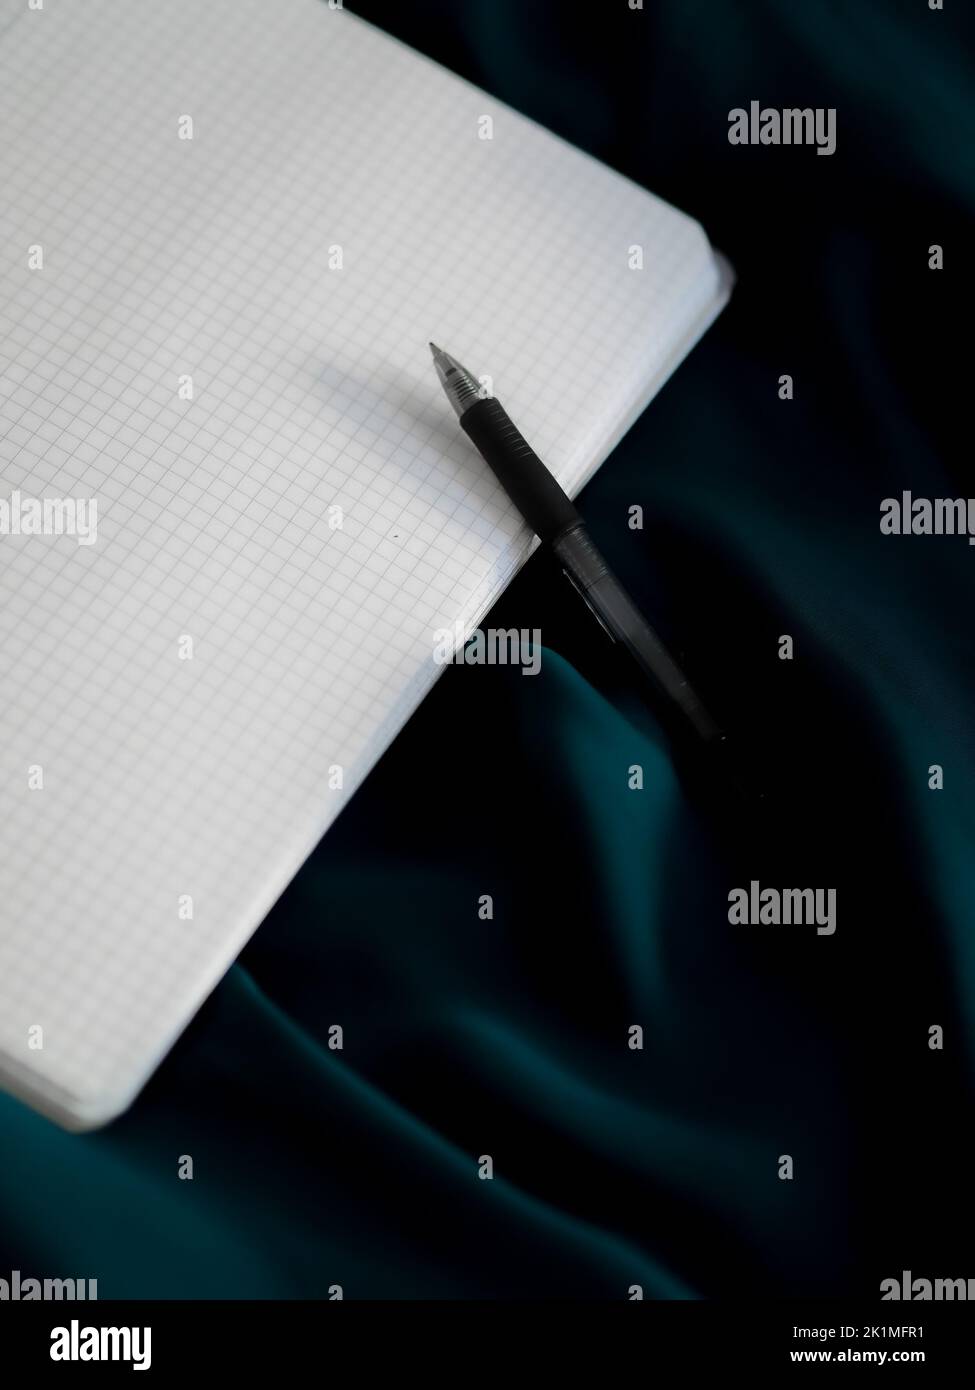 A pen and graphing paper on a shiny blue fabric surface Stock Photo